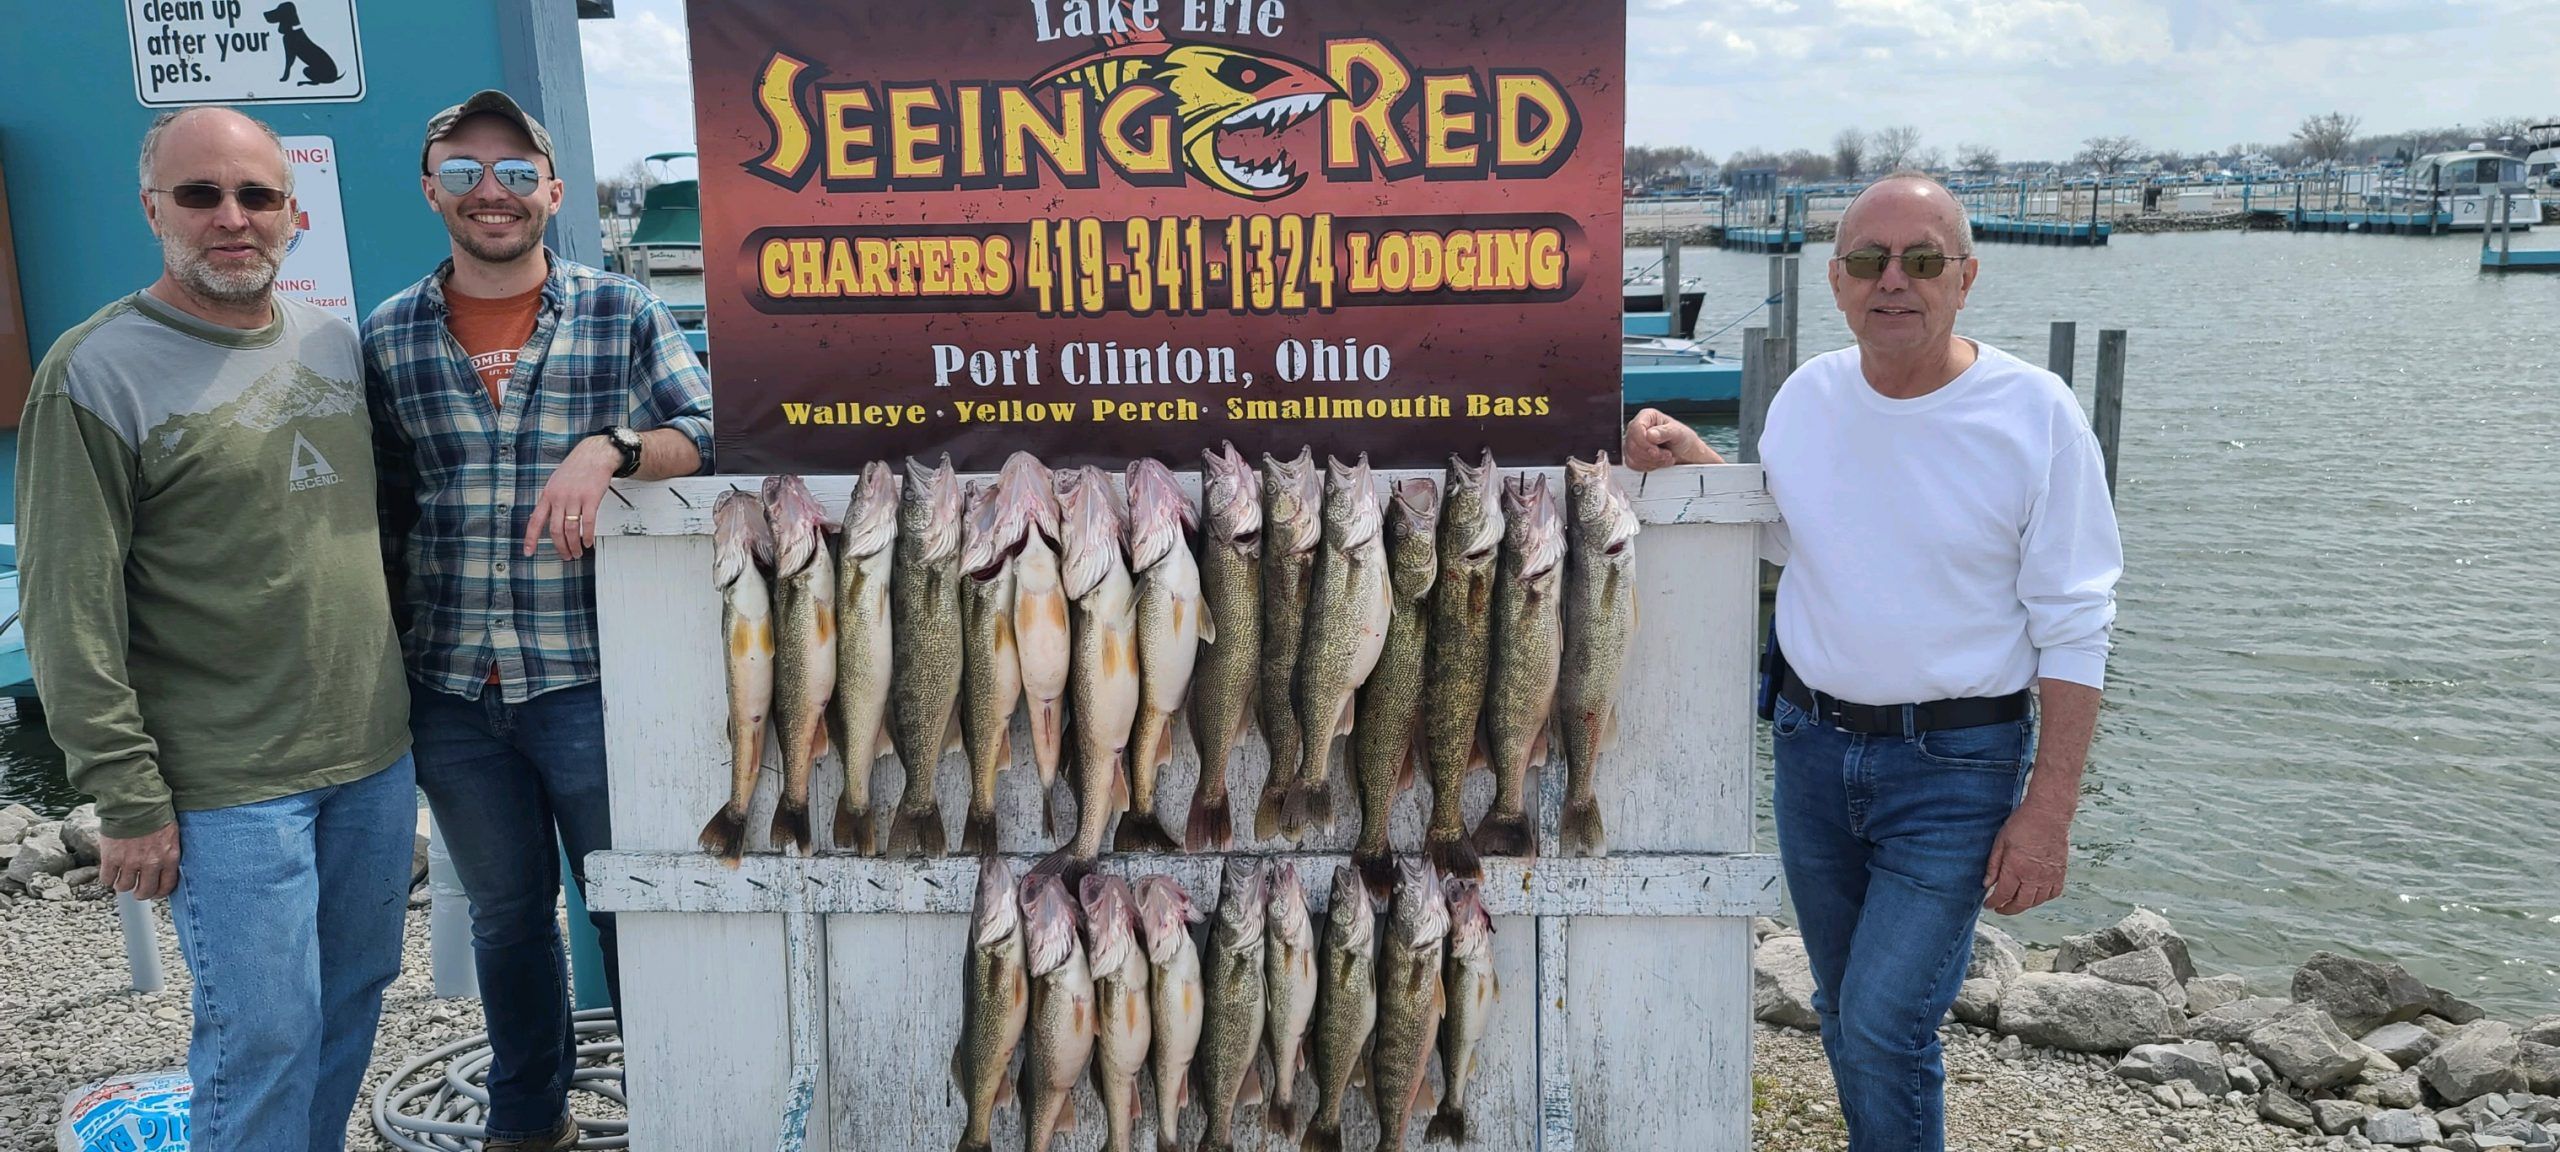 Seeing Red Charters Fishing Lake Erie Charters | Spring Charter Trip for 1 to 4 Anglers fishing Lake